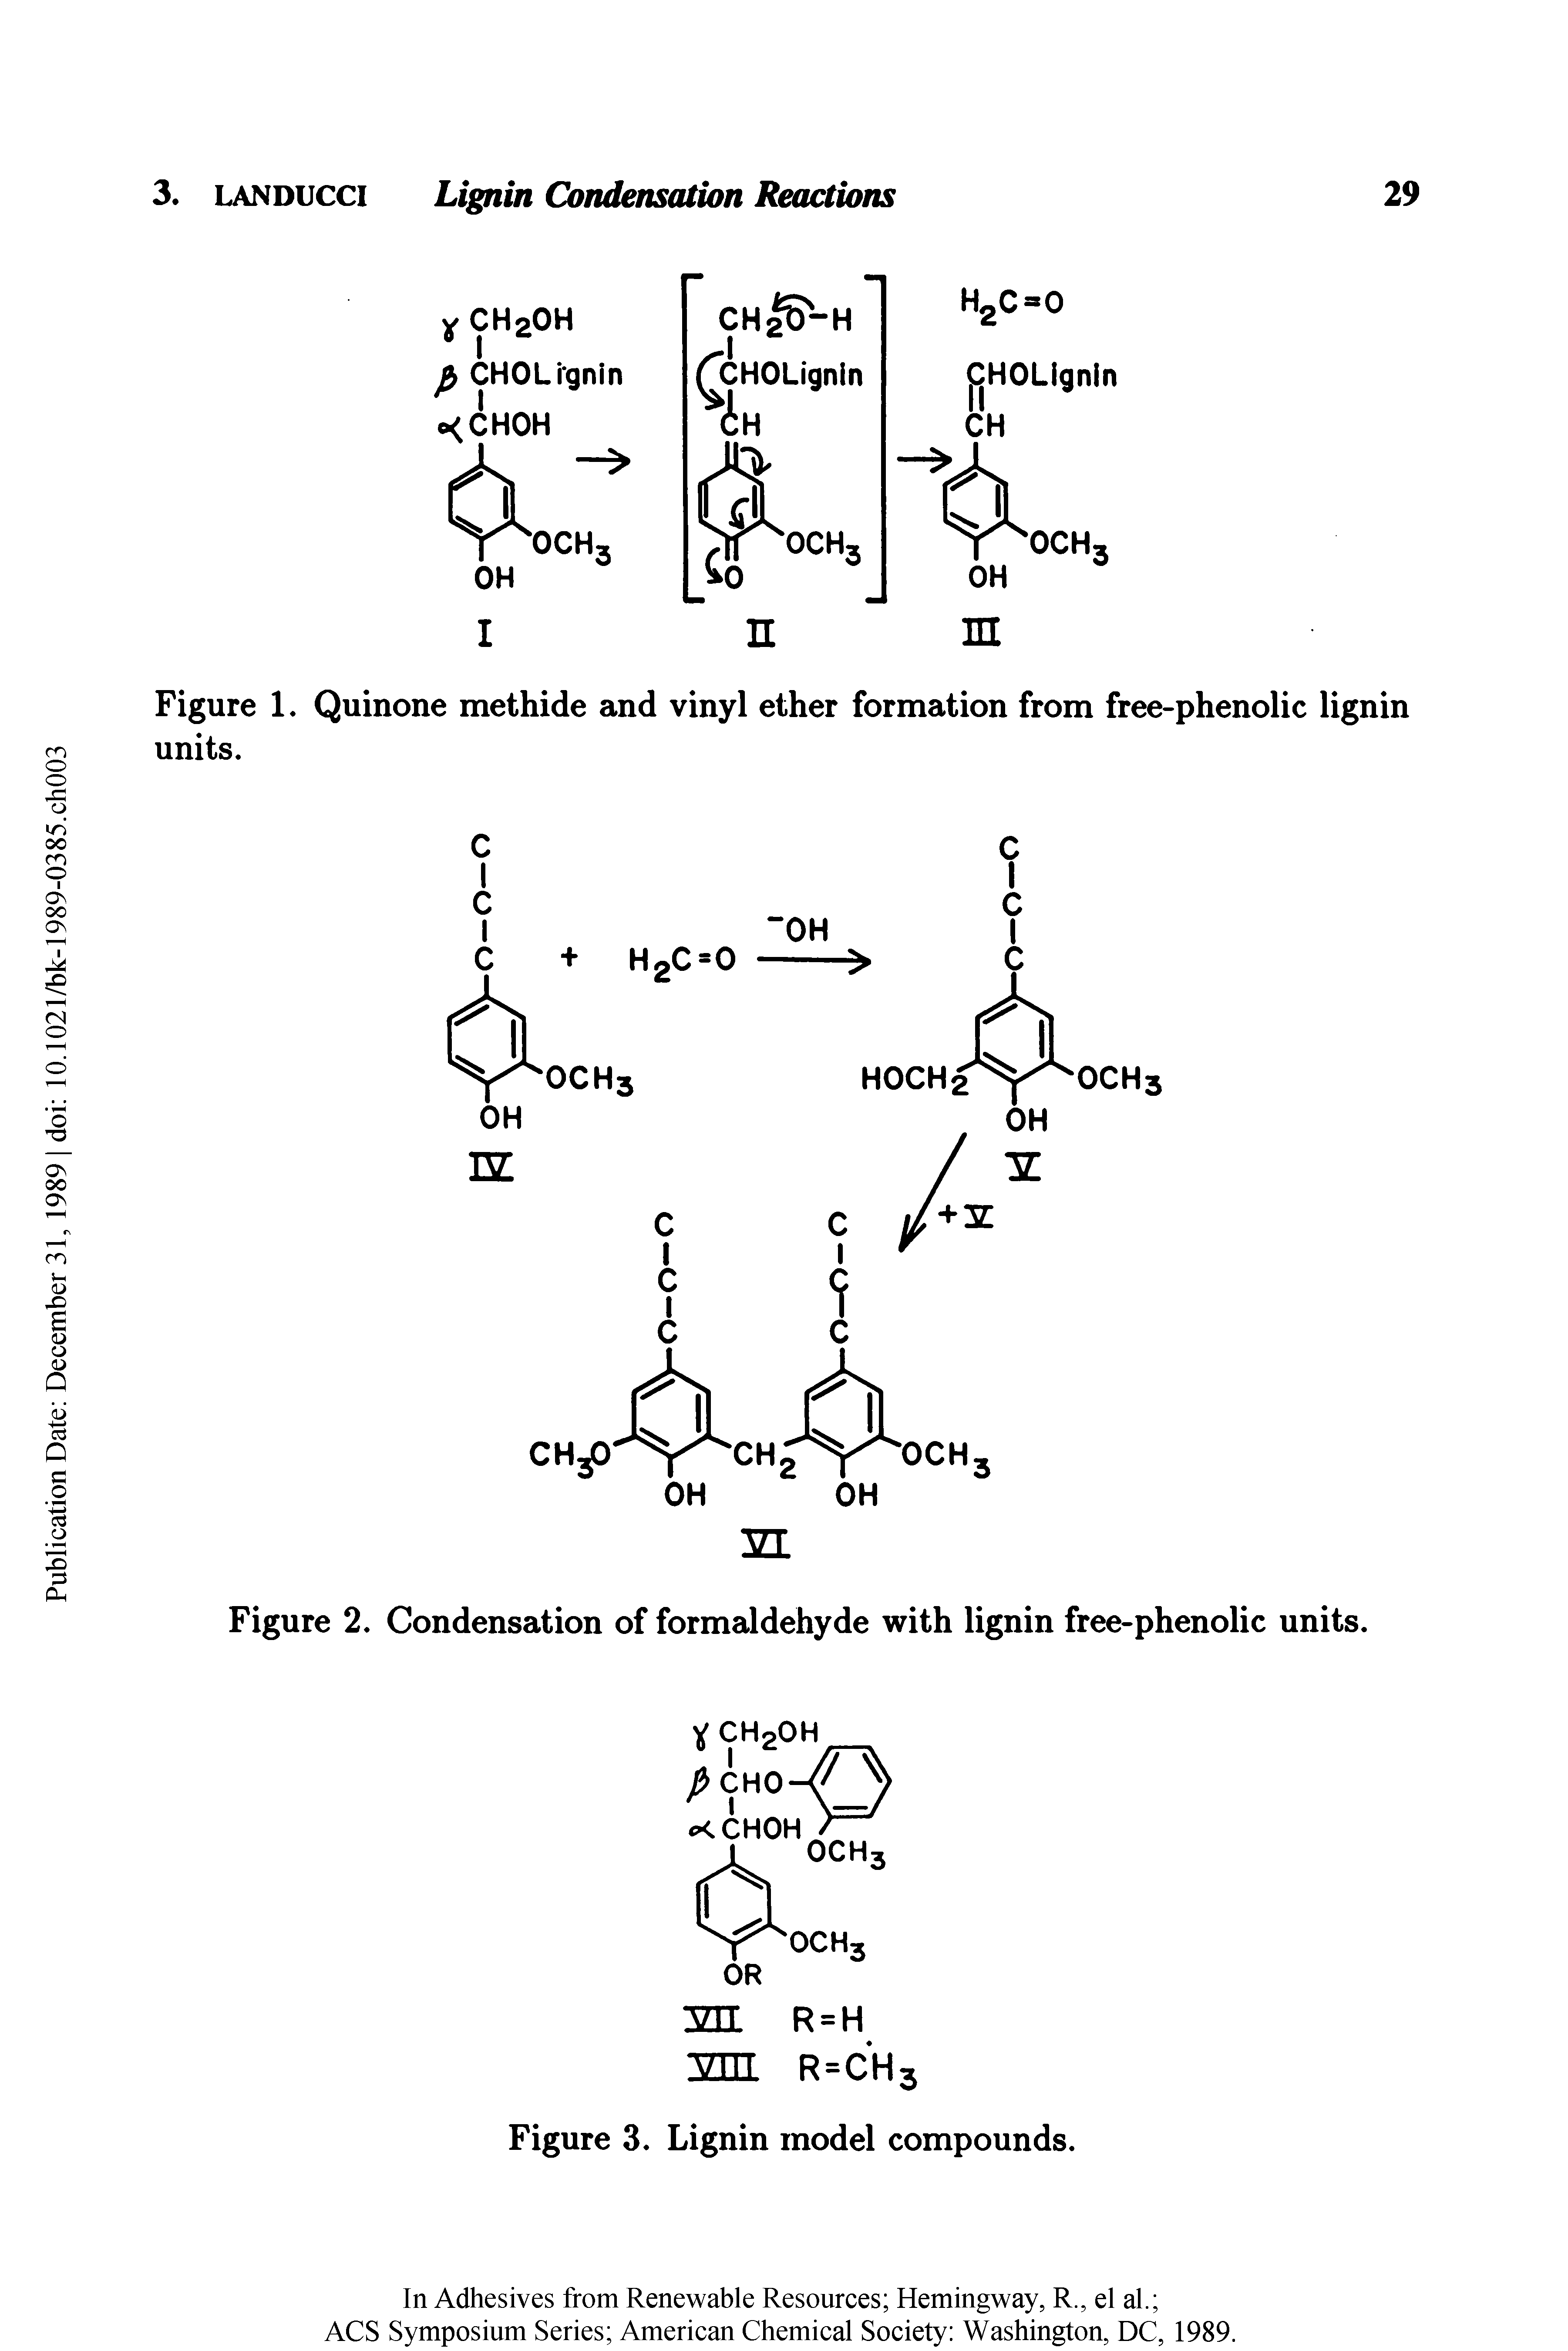 Figure 1. Quinone methide and vinyl ether formation from free-phenolic lignin units.